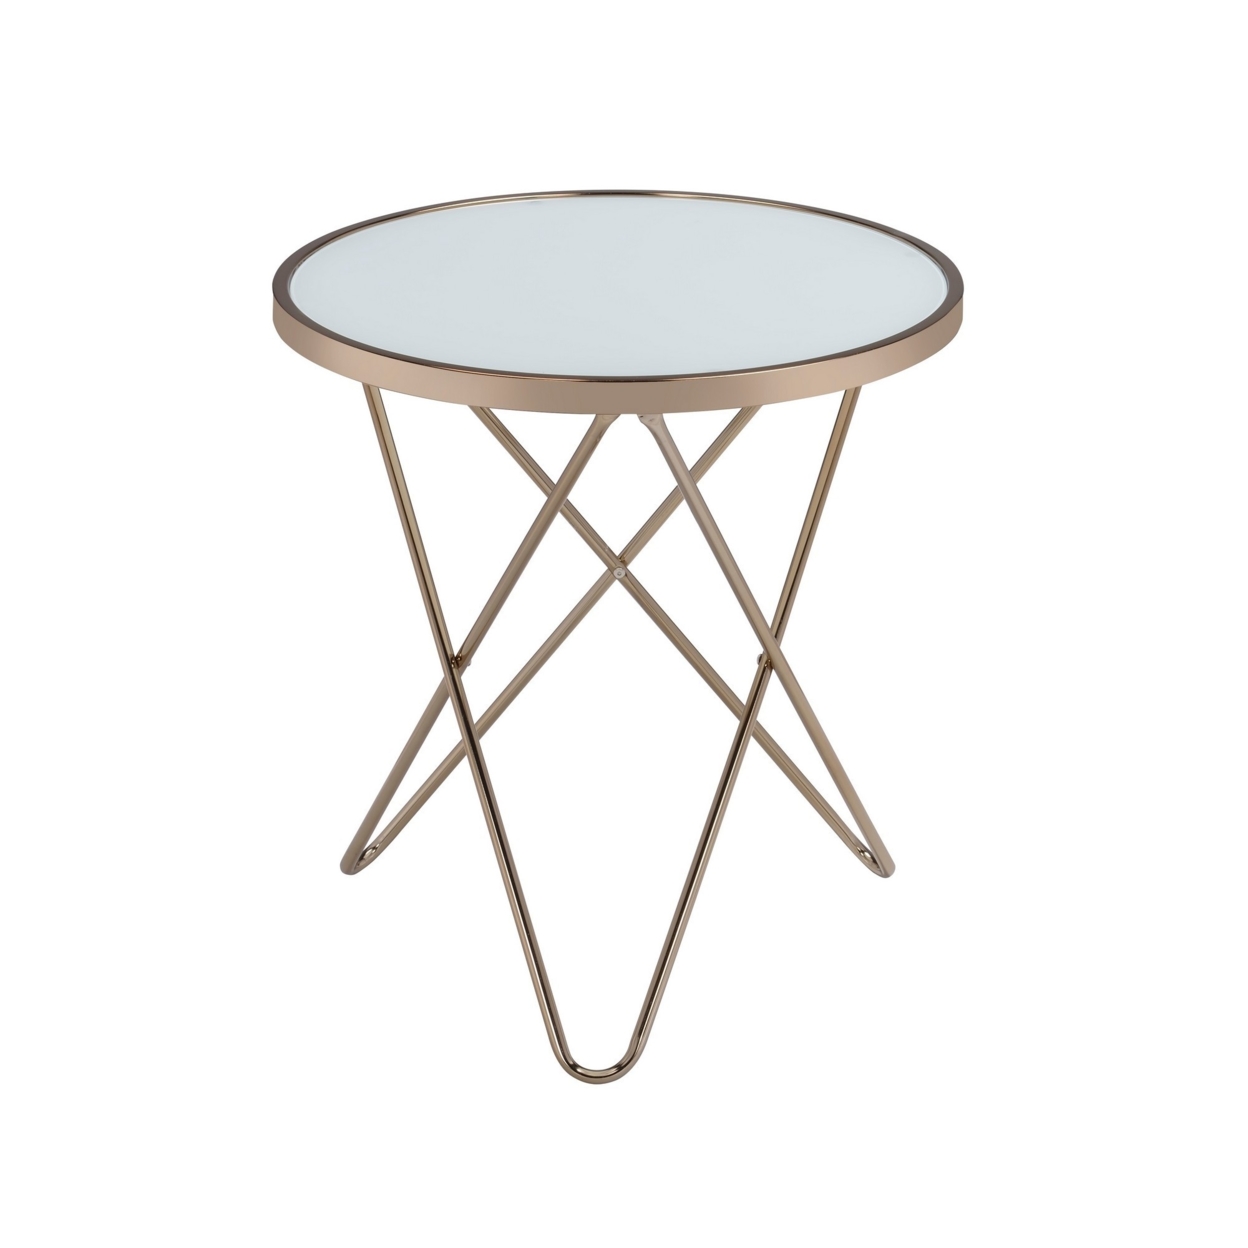 Valora End Table, Frosted Glass & Champagne- Saltoro Sherpi